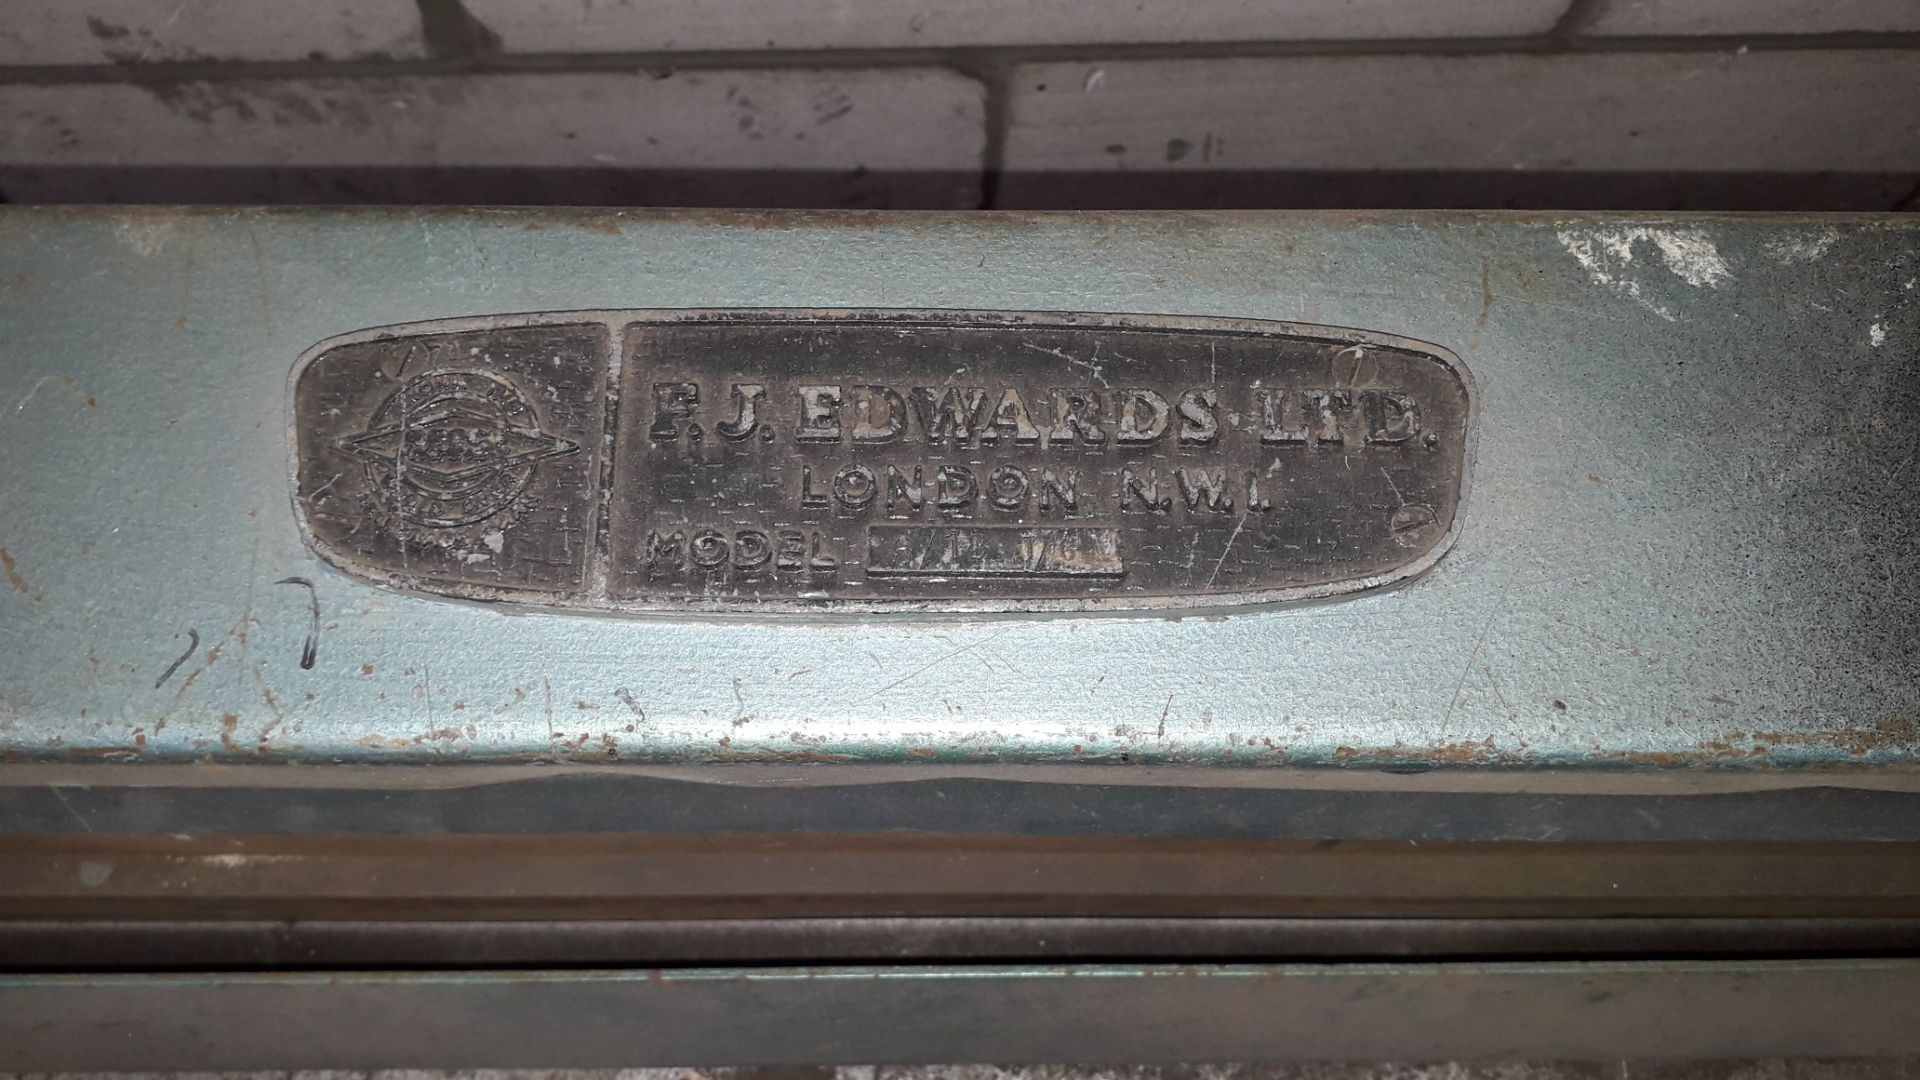 E J Edwards 6/18 T/G Mechanical Guillotine Serial Number 690/27277 - Image 4 of 4